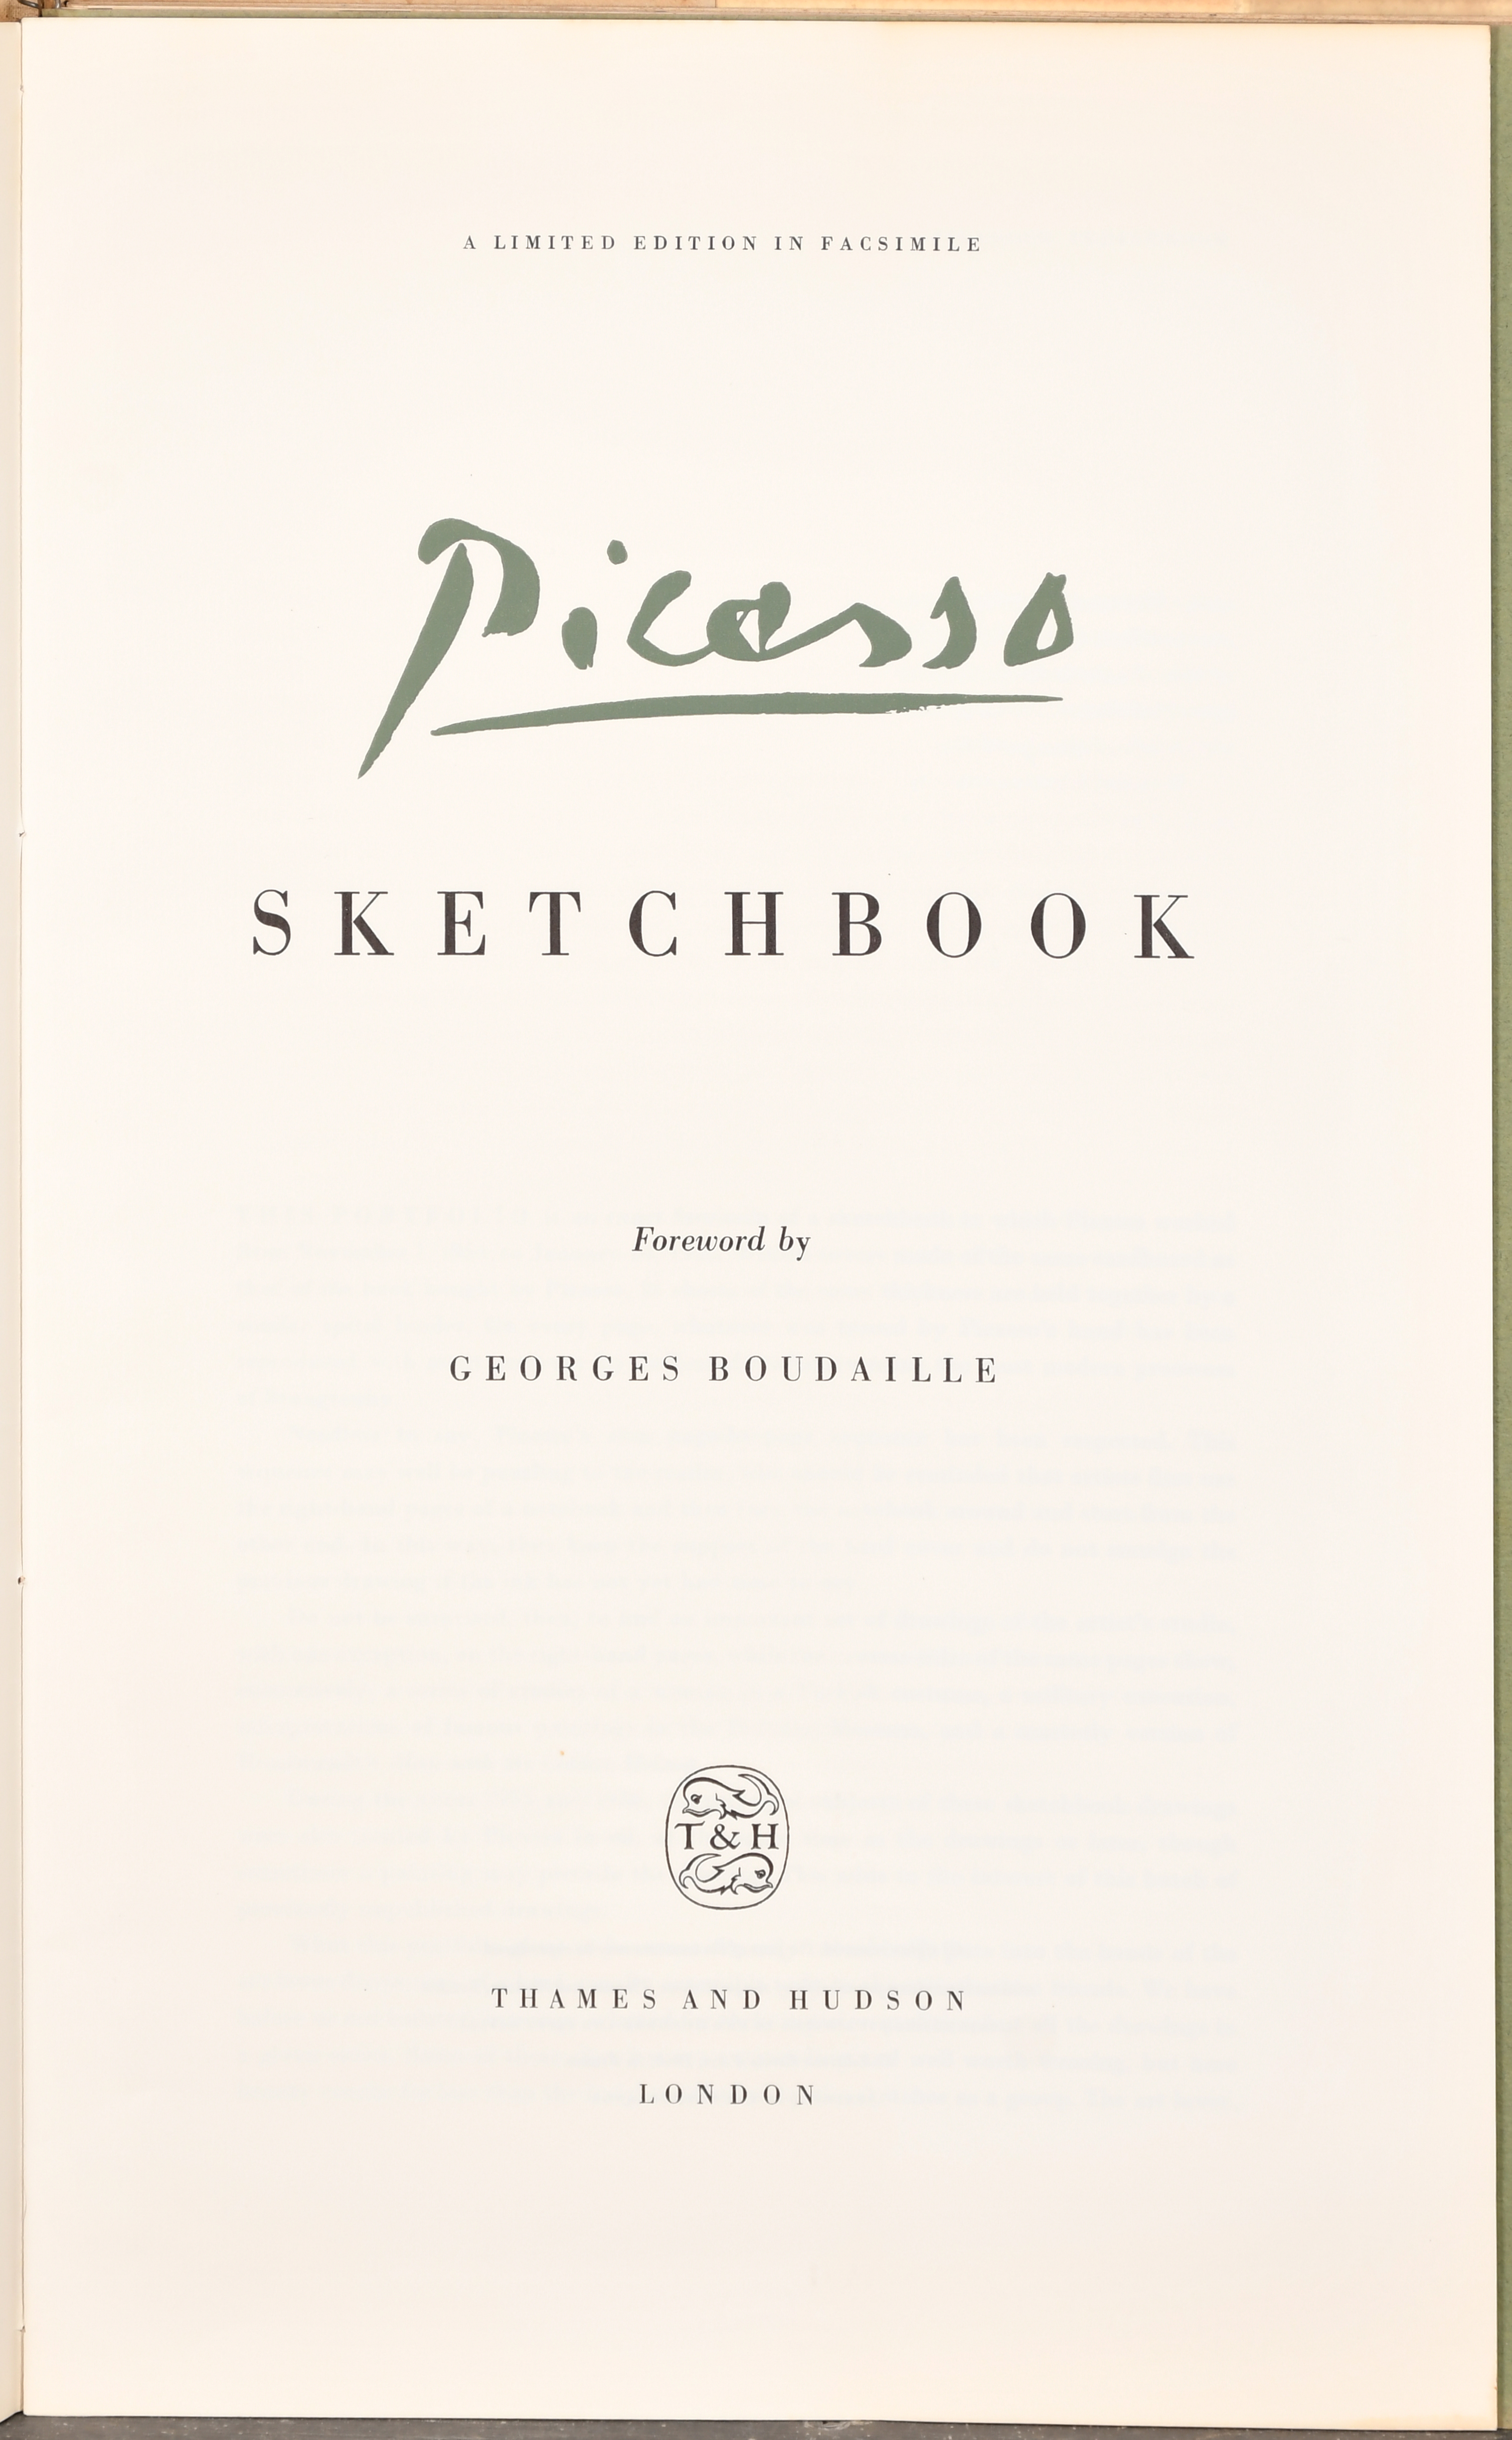 Pablo Picasso (1881-1973) Spanish. 'Picasso's Sketchbook', Limited Edition in facsimile, published - Image 3 of 4